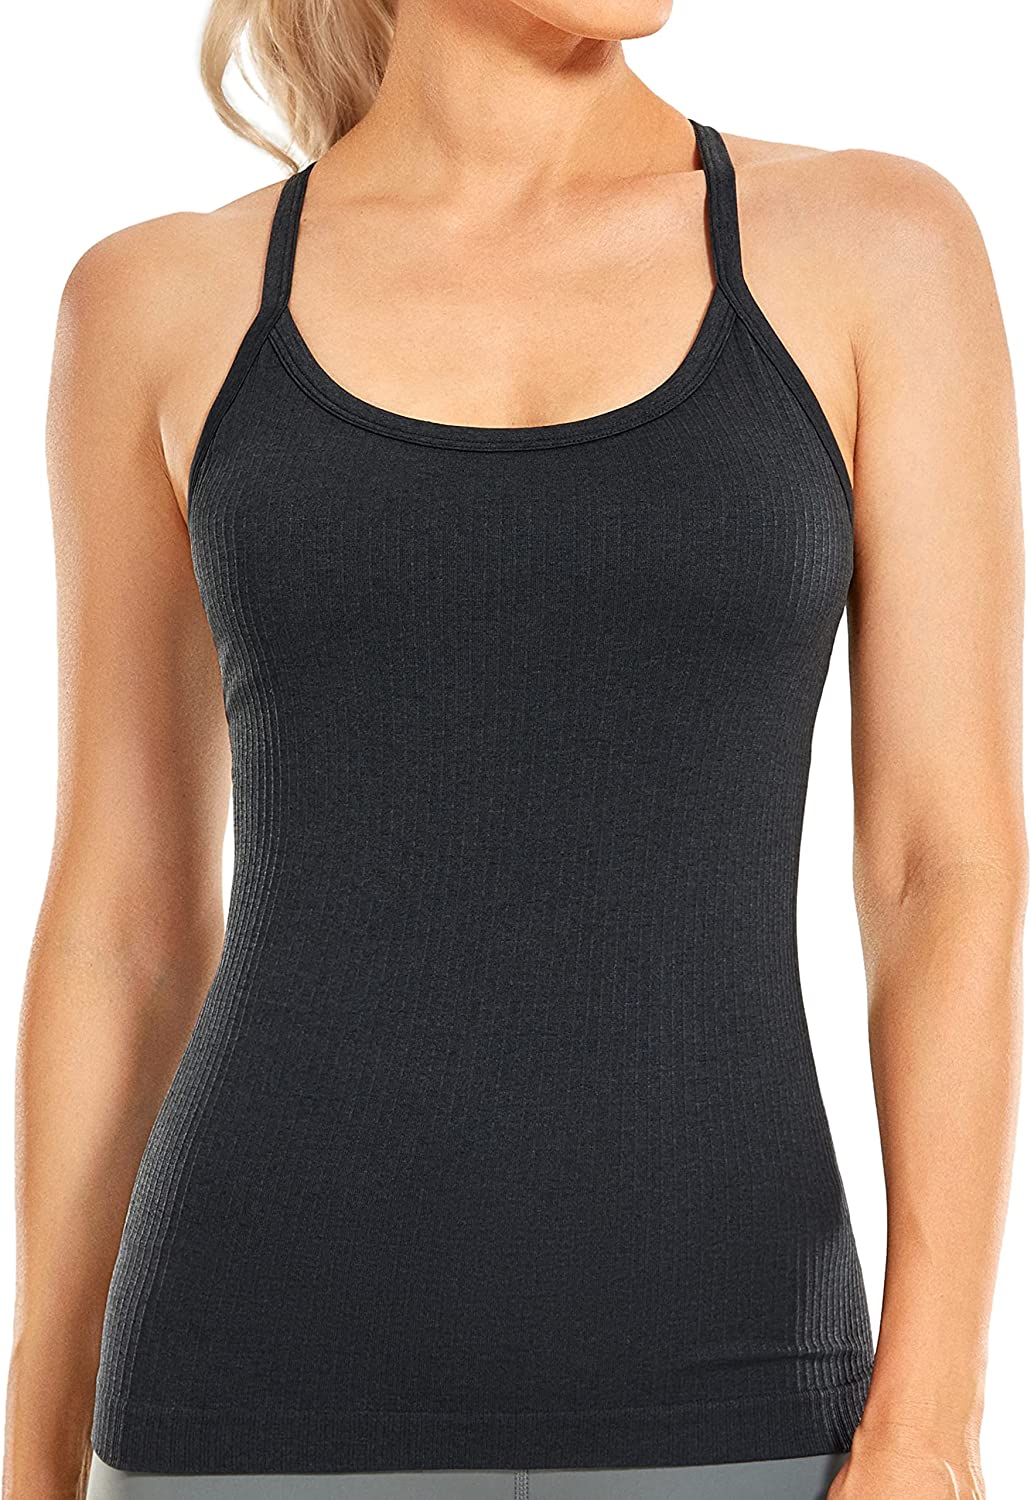 CRZ YOGA Seamless Workout Tank Tops for Women Racerback Athletic Camisole  Sports Shirts with Built in Bra by CRZ YOGA - Shop Online for Bags in New  Zealand